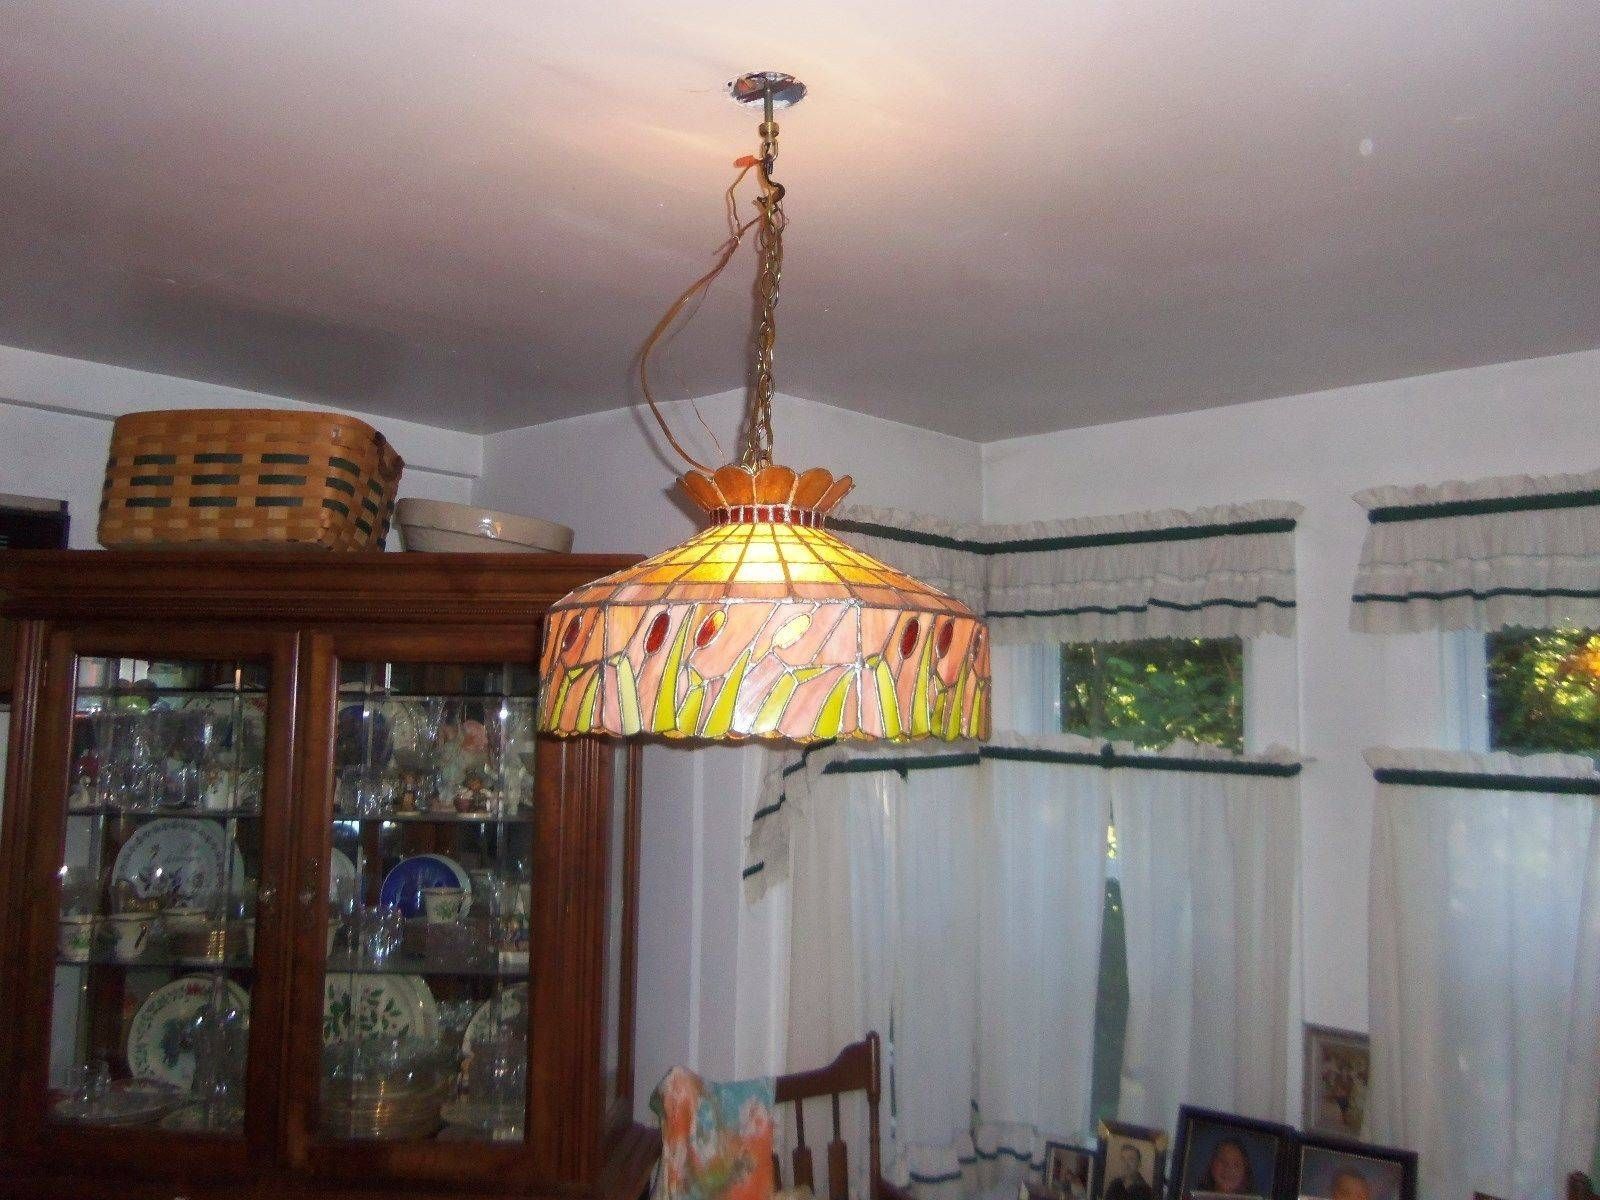 Stained Glass Light Fixtures Dining Room – Alliancemv Within Diy Stained Glass Pendant Lights (View 12 of 15)